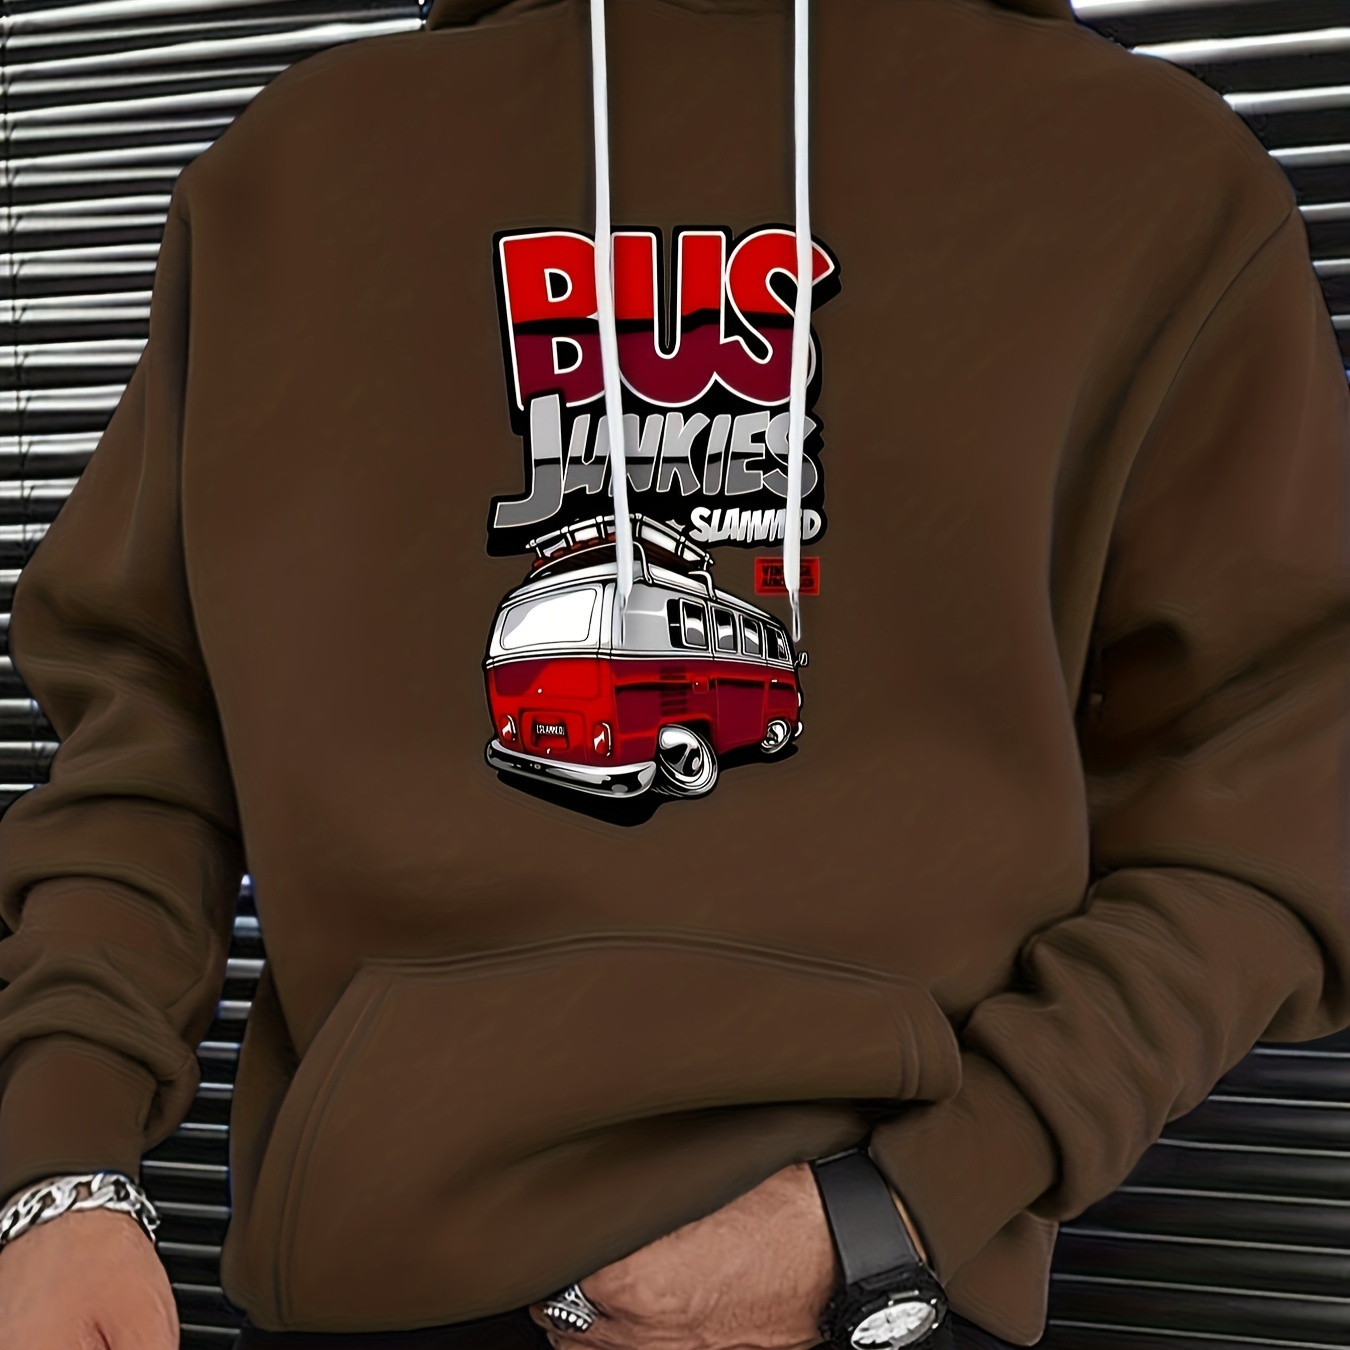 

Trendy Bus Print, Hoodies For Men, Graphic Sweatshirt With Kangaroo Pocket, Comfy Trendy Hooded Pullover, Mens Clothing For Fall Winter